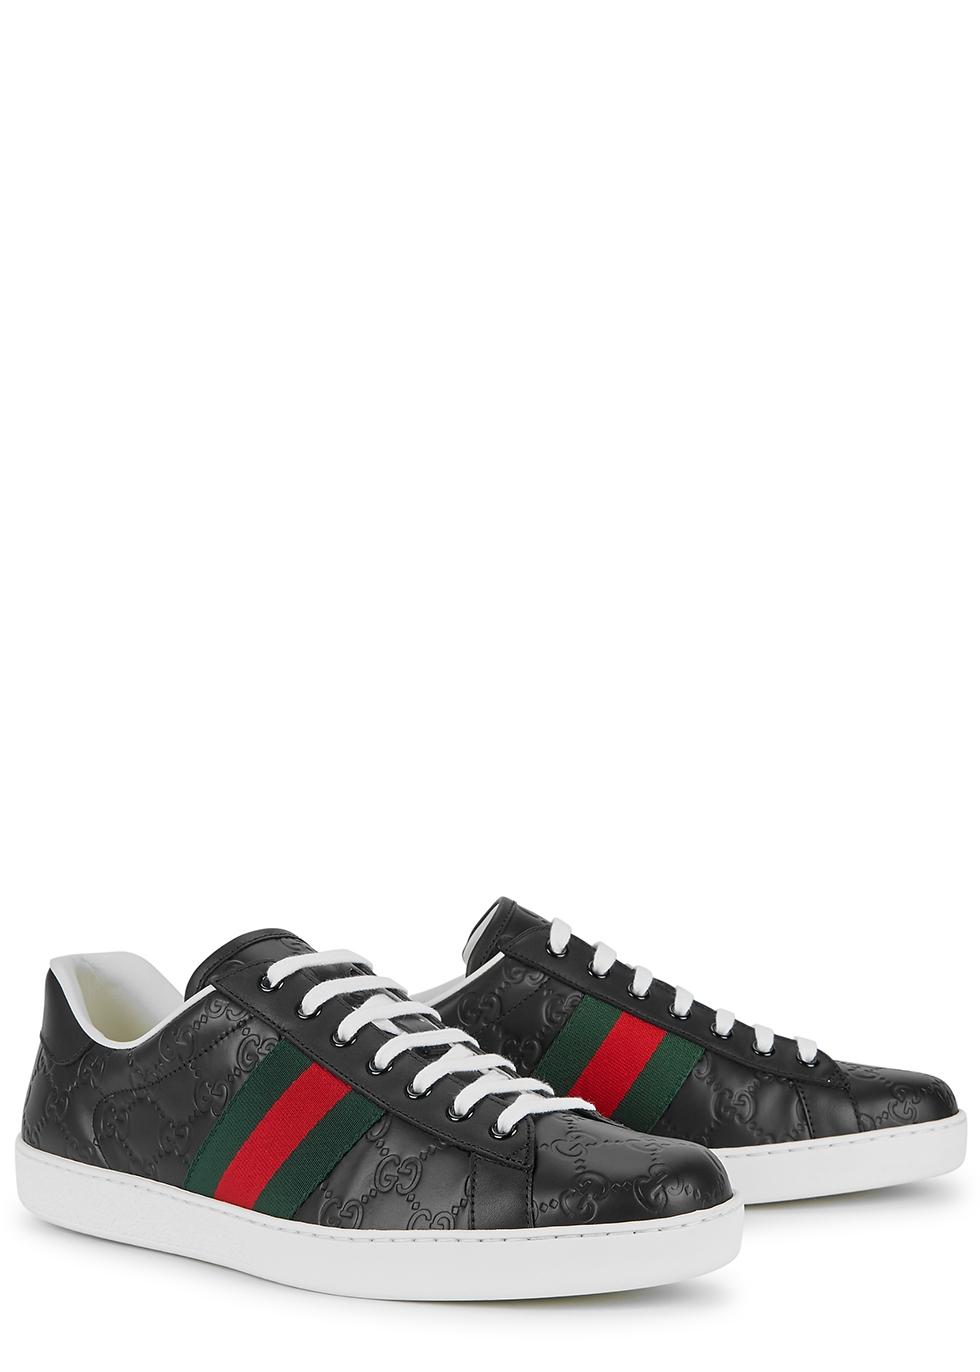 Gucci Ace GG Embossed Leather Sneakers in Black for Men - Lyst